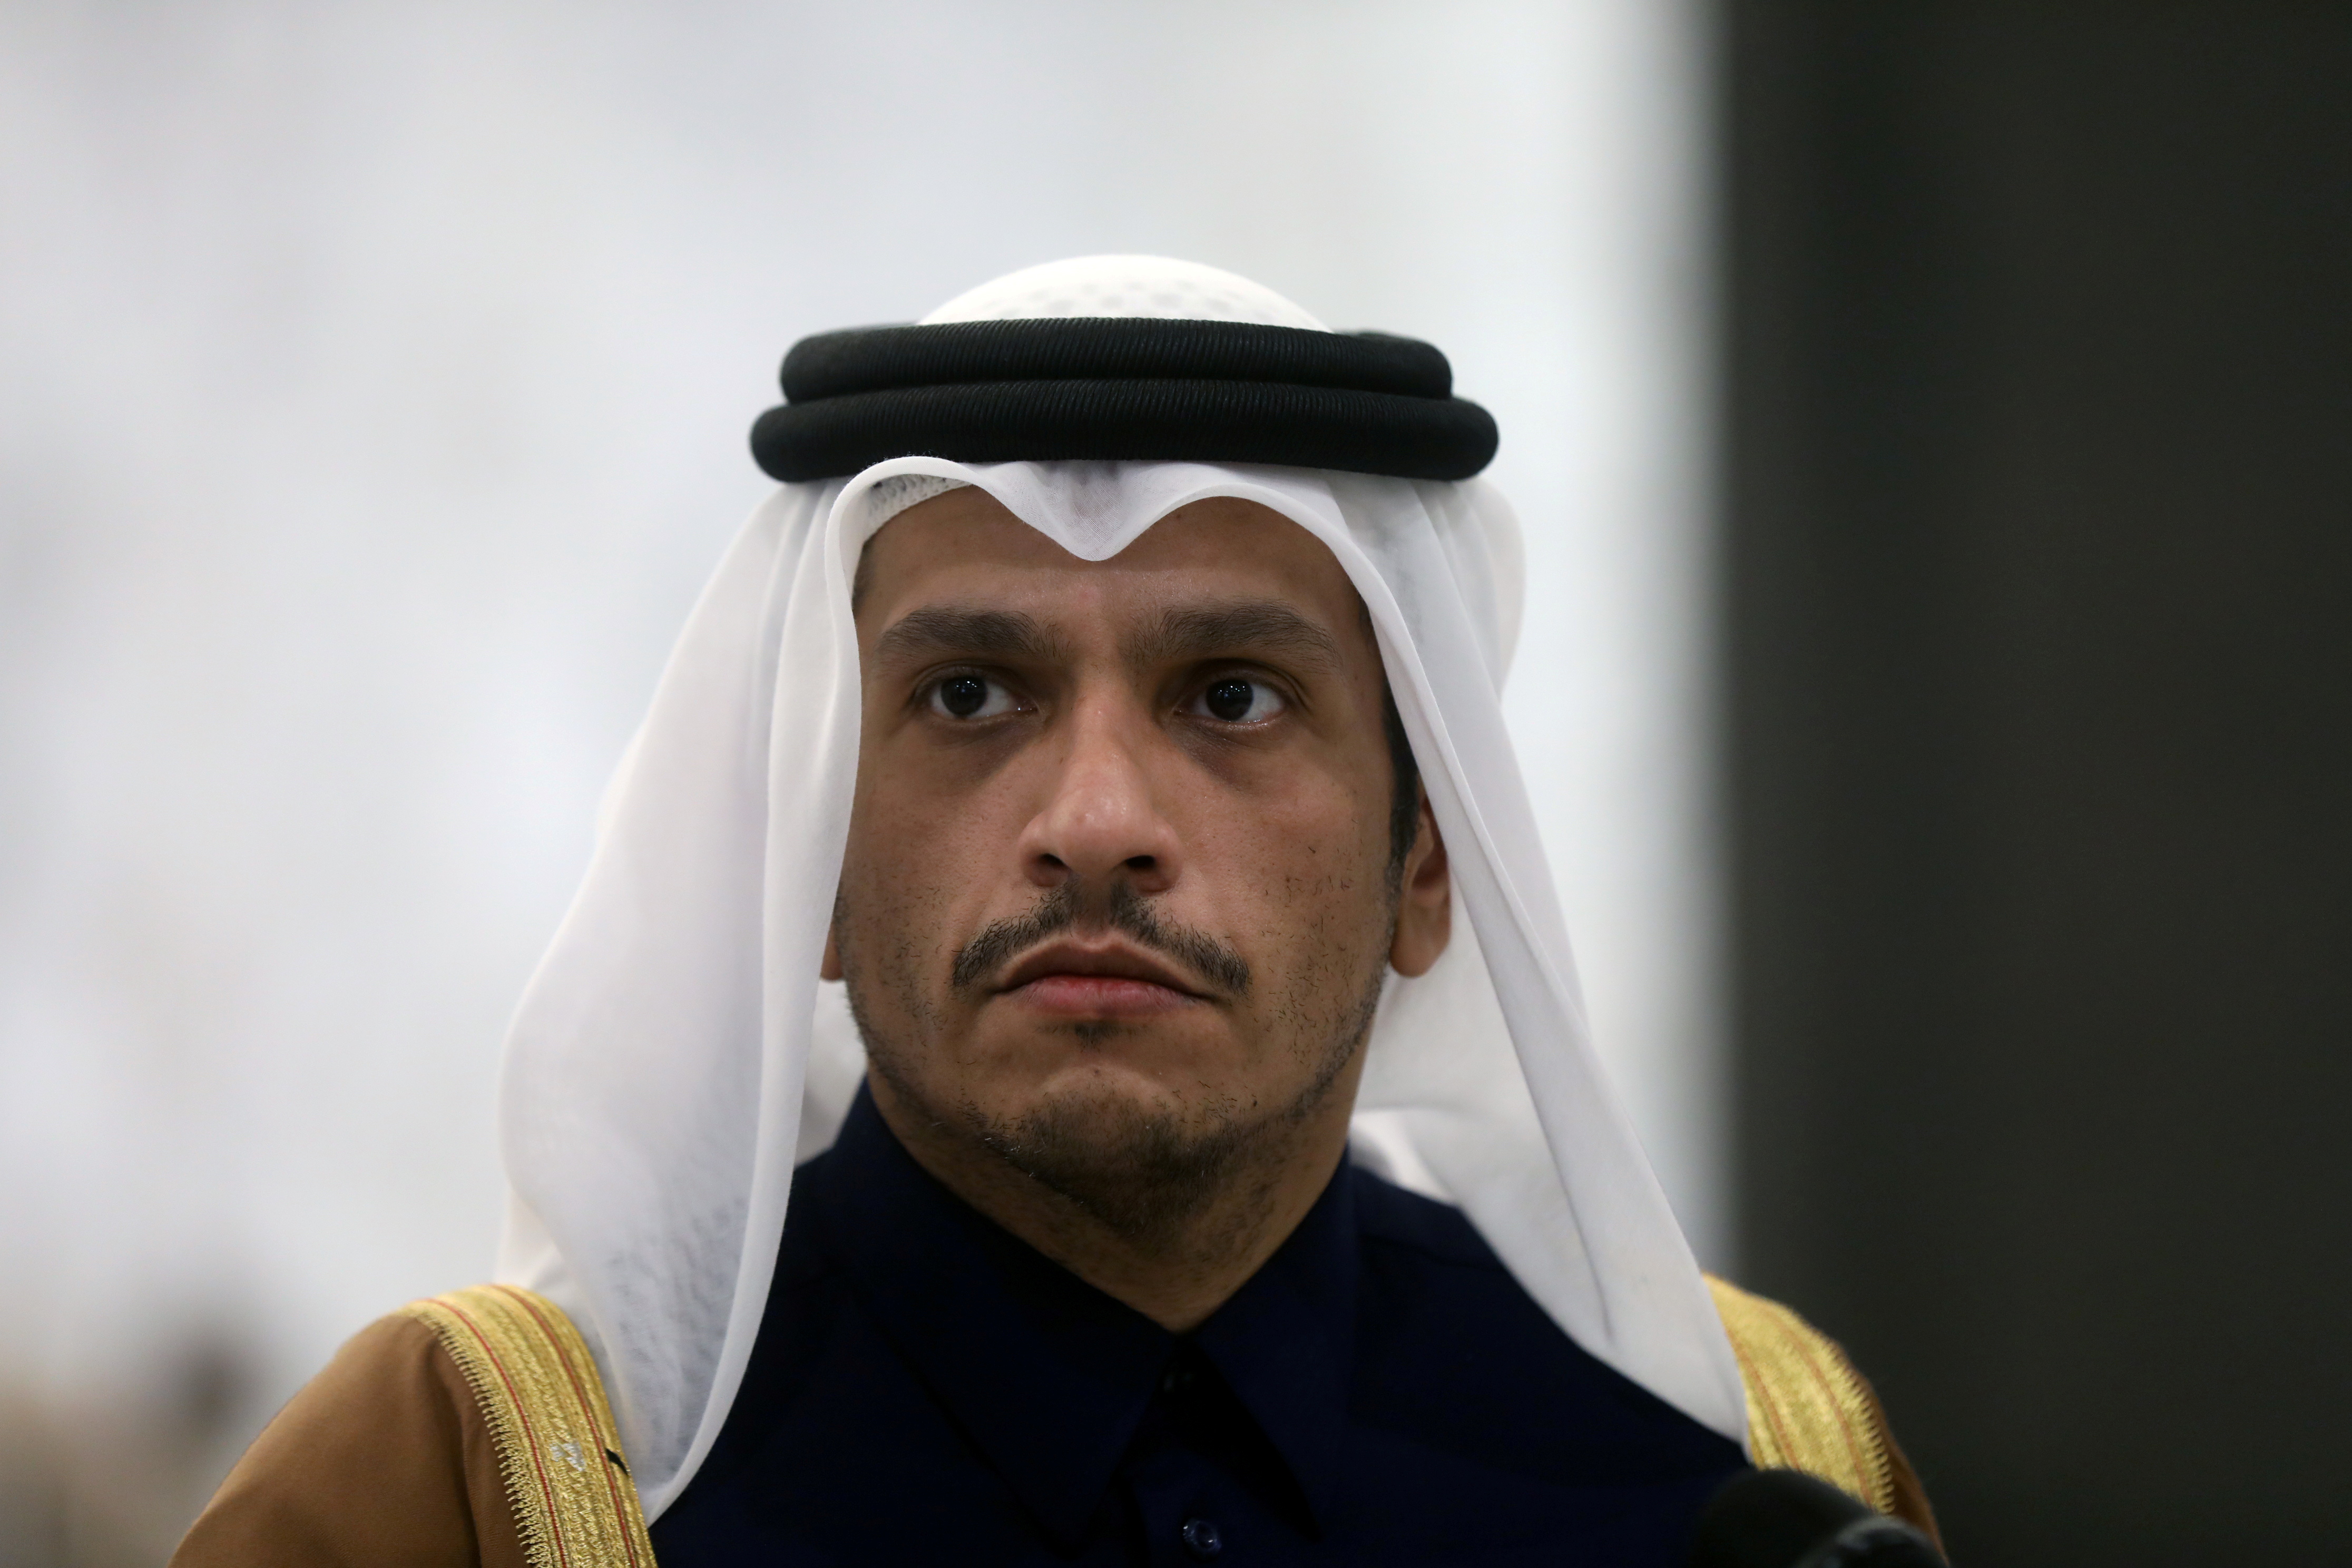 Qatari foreign minister Sheikh Mohammed bin Abdulrahman Al-Thani, is pictured at the presidential palace in Baabda